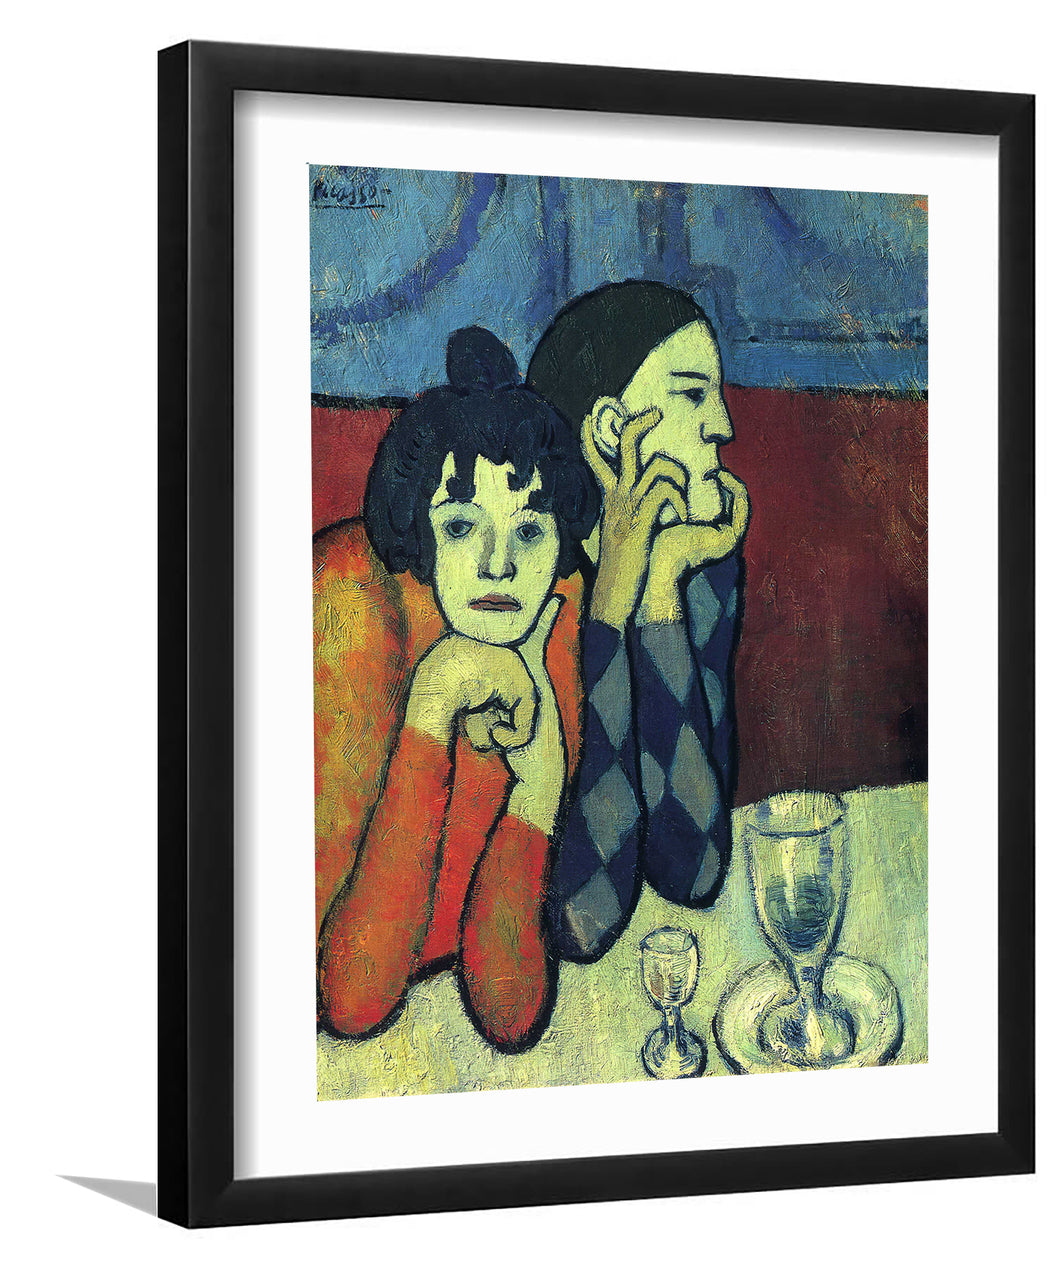 Two Acrobats (Harlequin And His Companion) By Pablo Picasso-Canvas Art,Art Print,Framed Art,Plexiglass cover